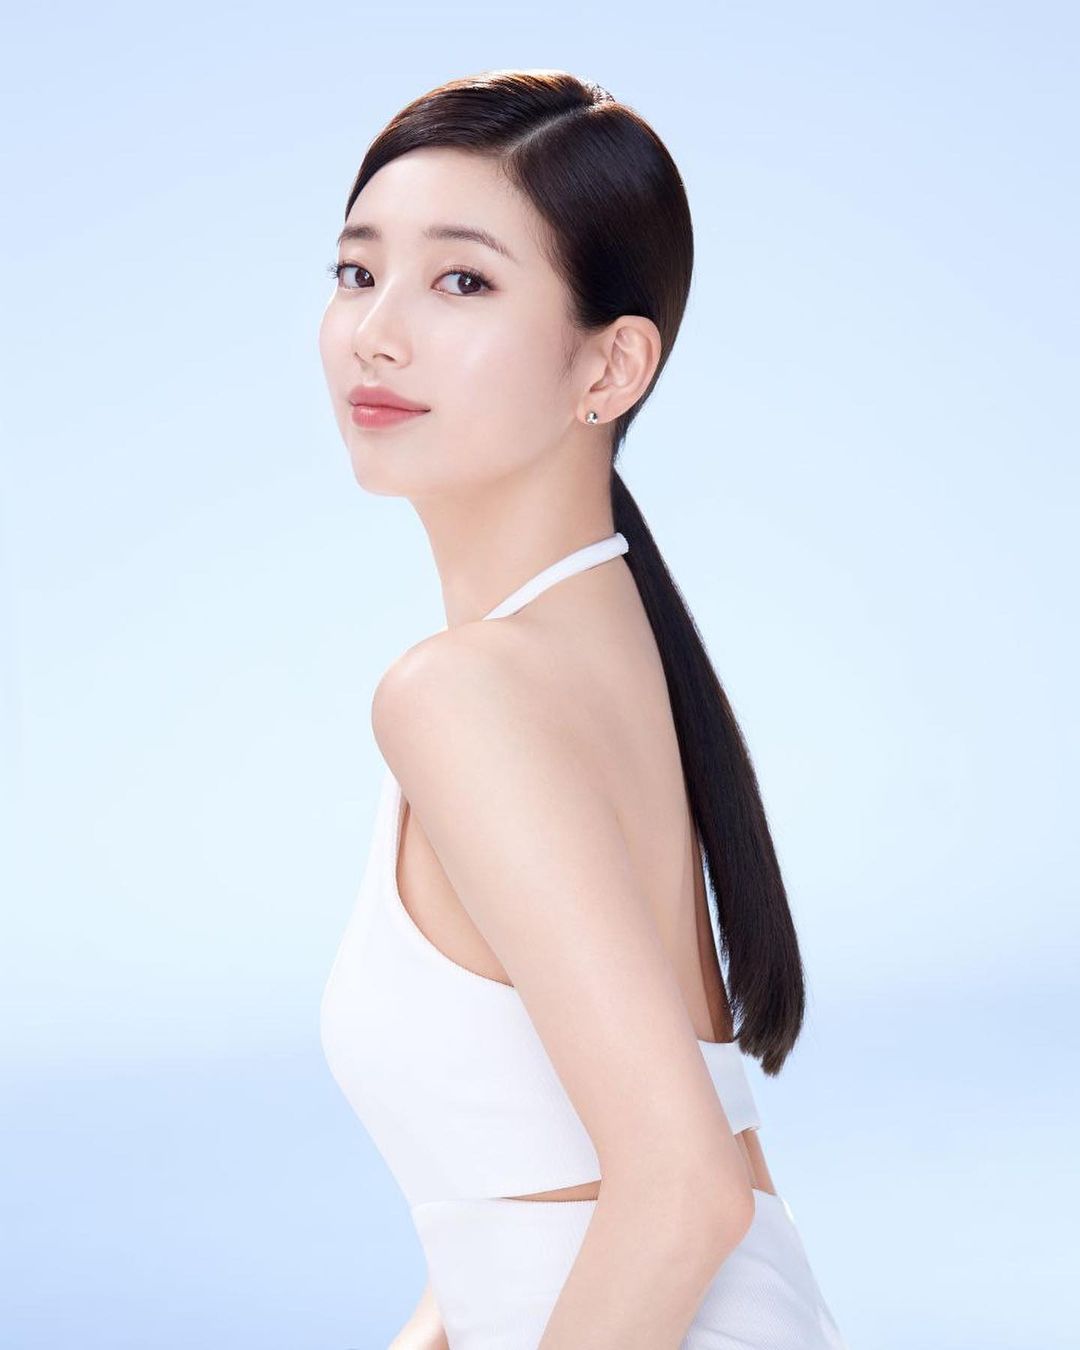 Get Toned Arms Like Kpop Idol Suzy Bae in Just 10 Minutes